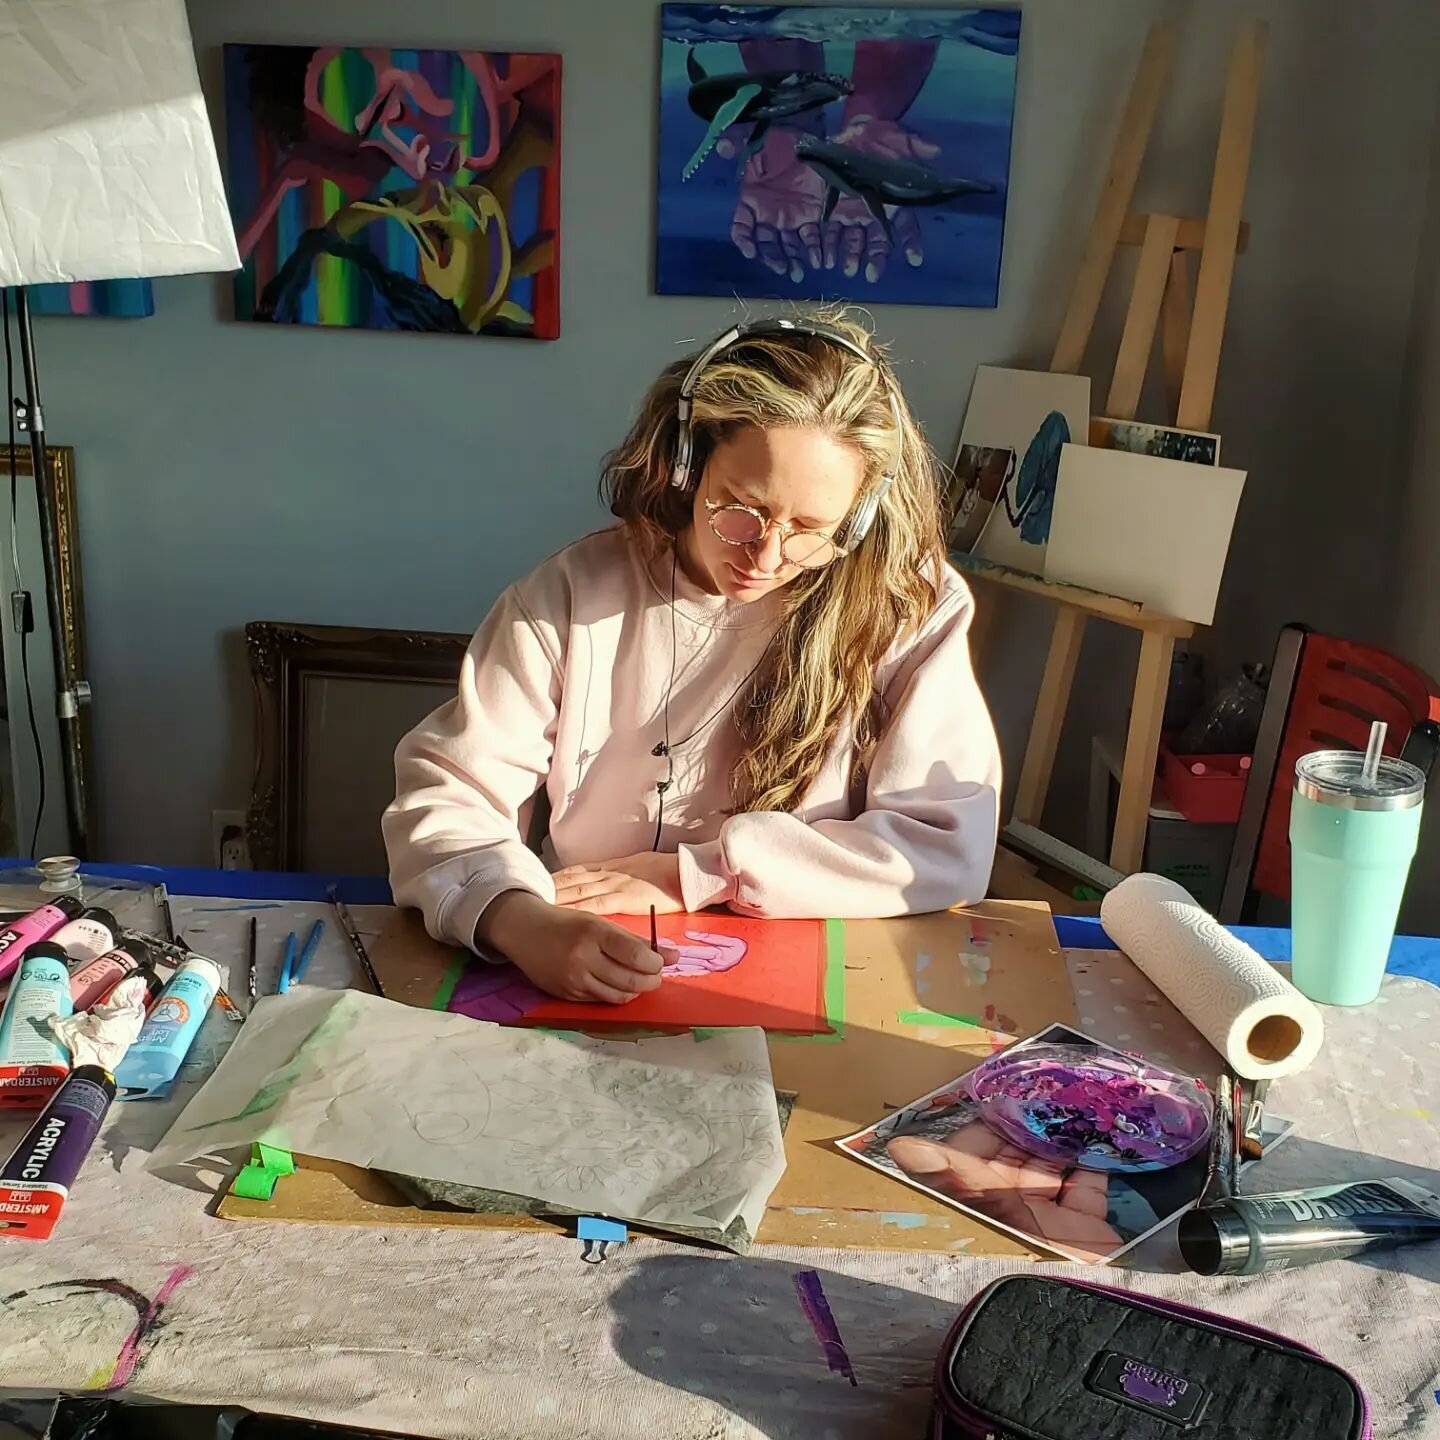 Messy hair, no make up, pajamas on. These days sometimes those early morning and late night sessions are all I have. It sure is beautiful to watch the sun bow across the sky and light my studio warmly. Even though this is my only time to paint l, it 